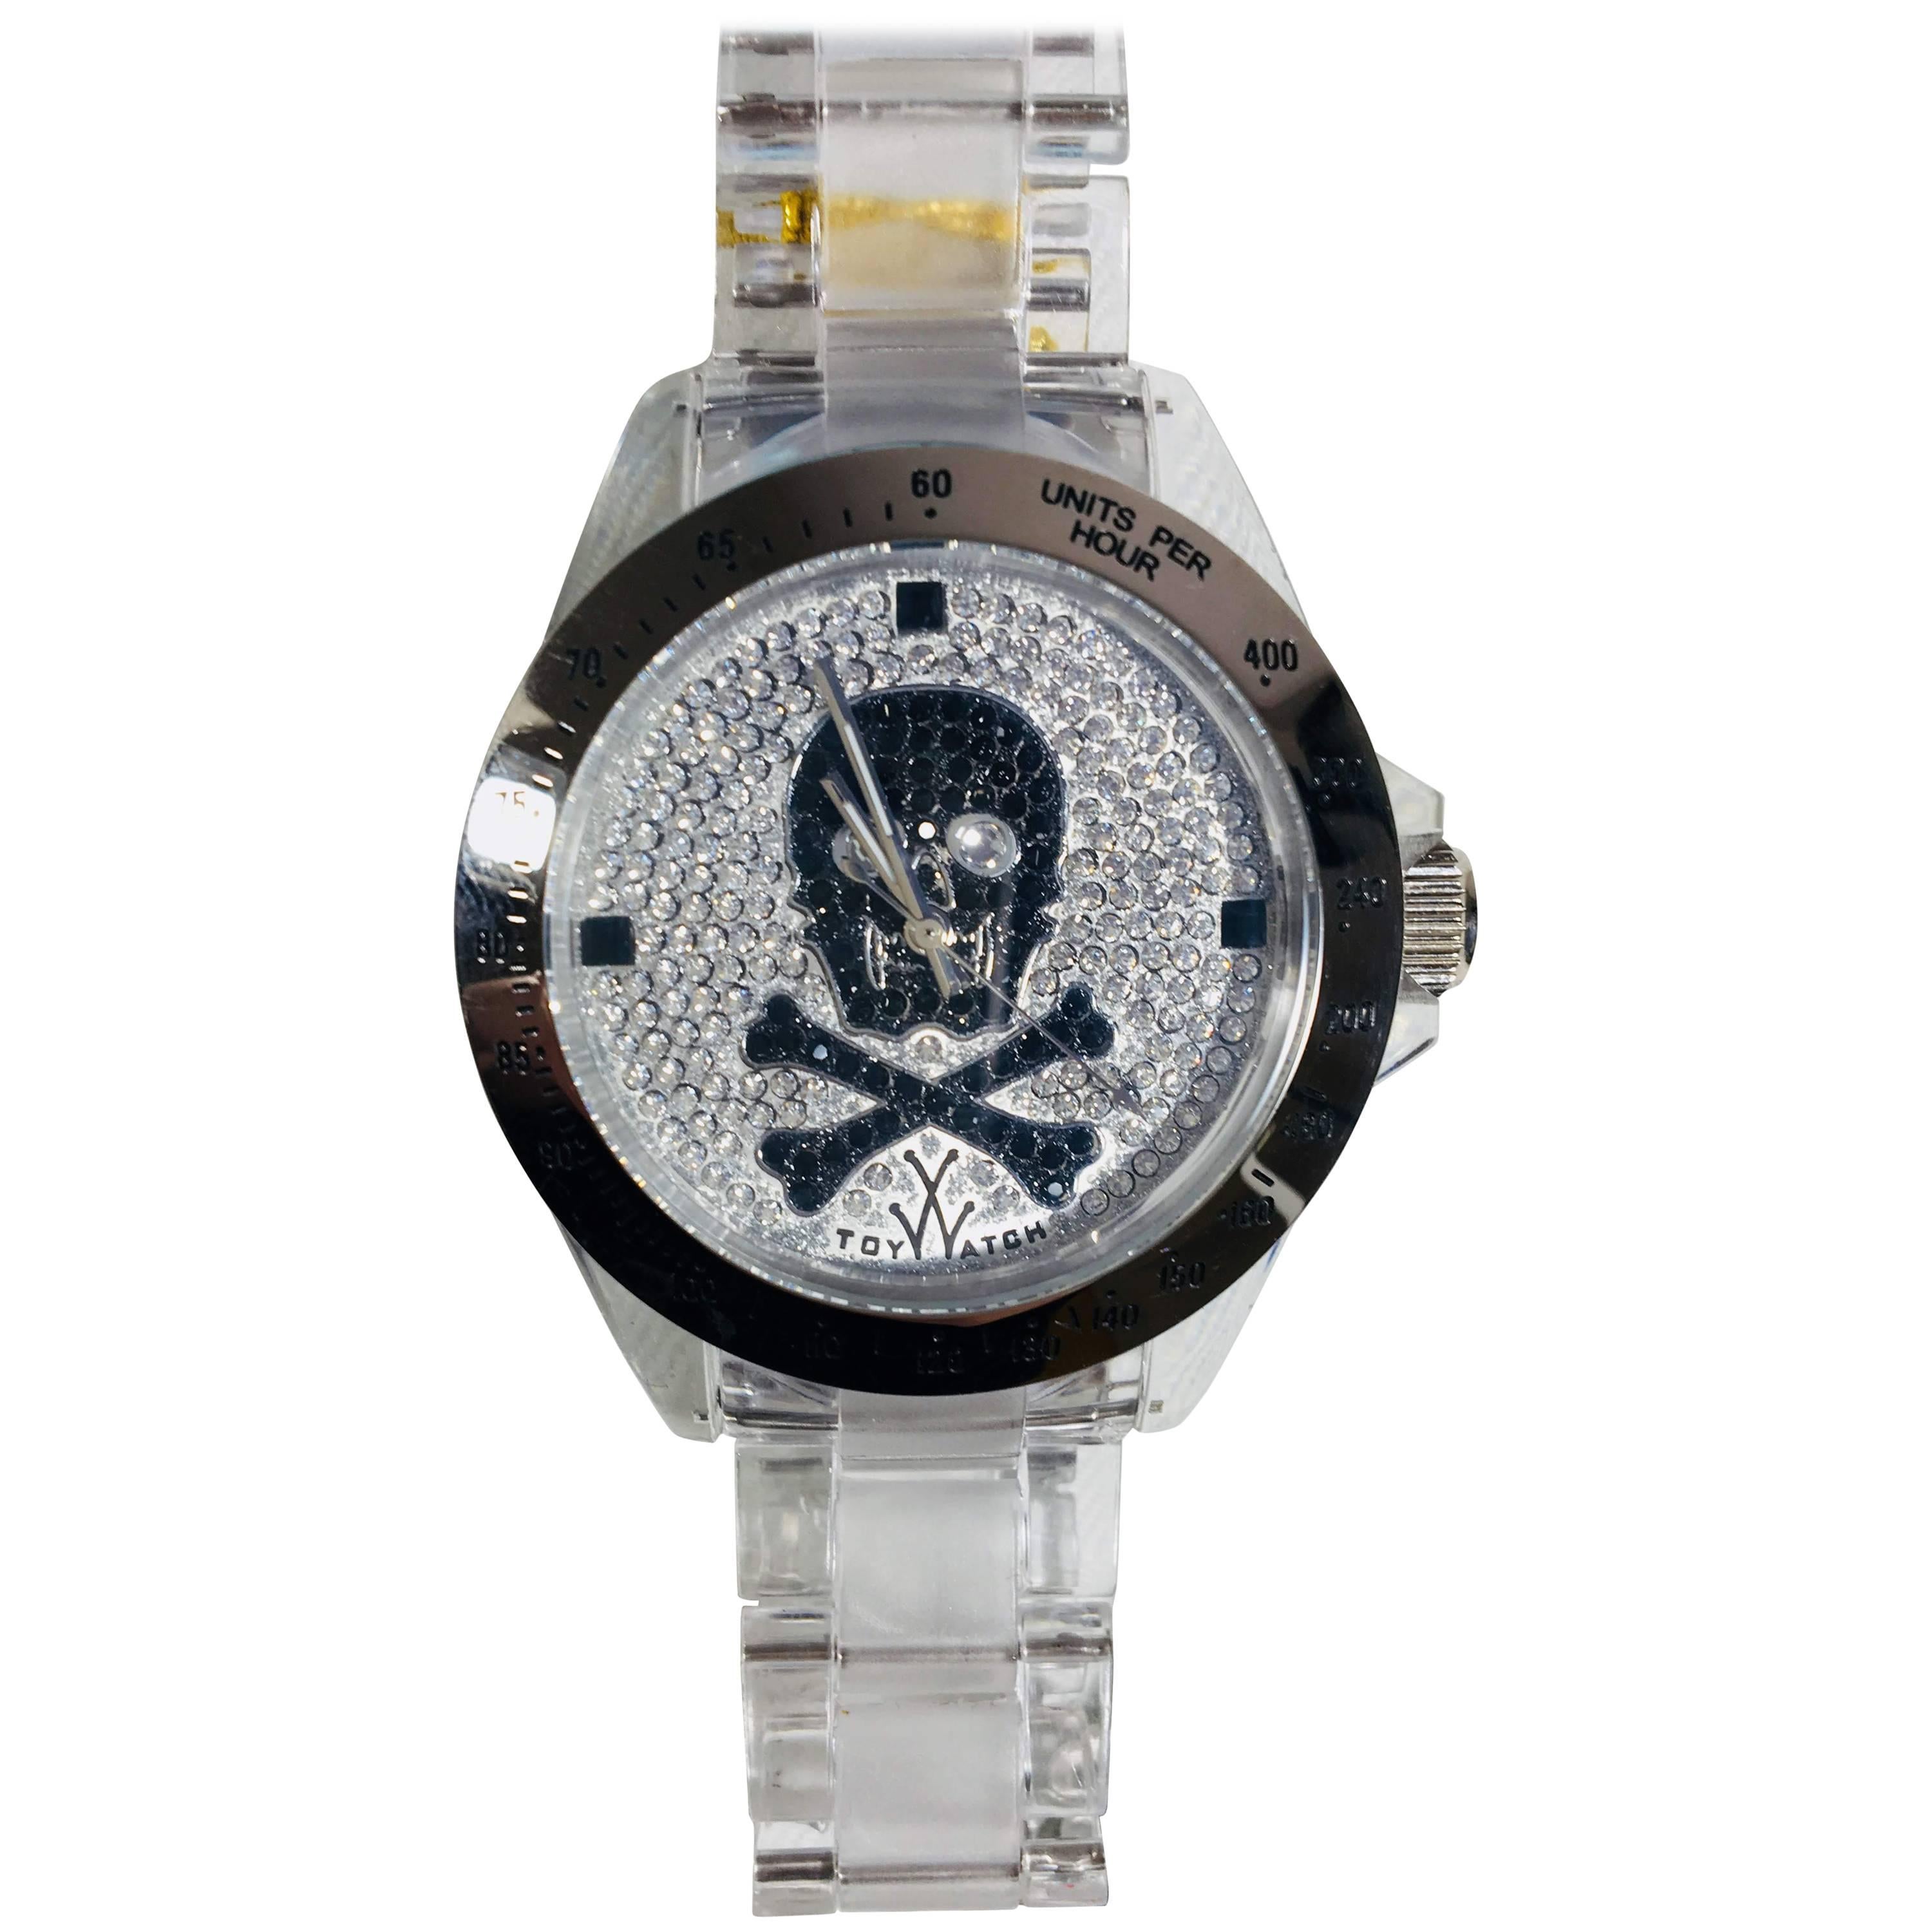 Toy Watch with Skull Face